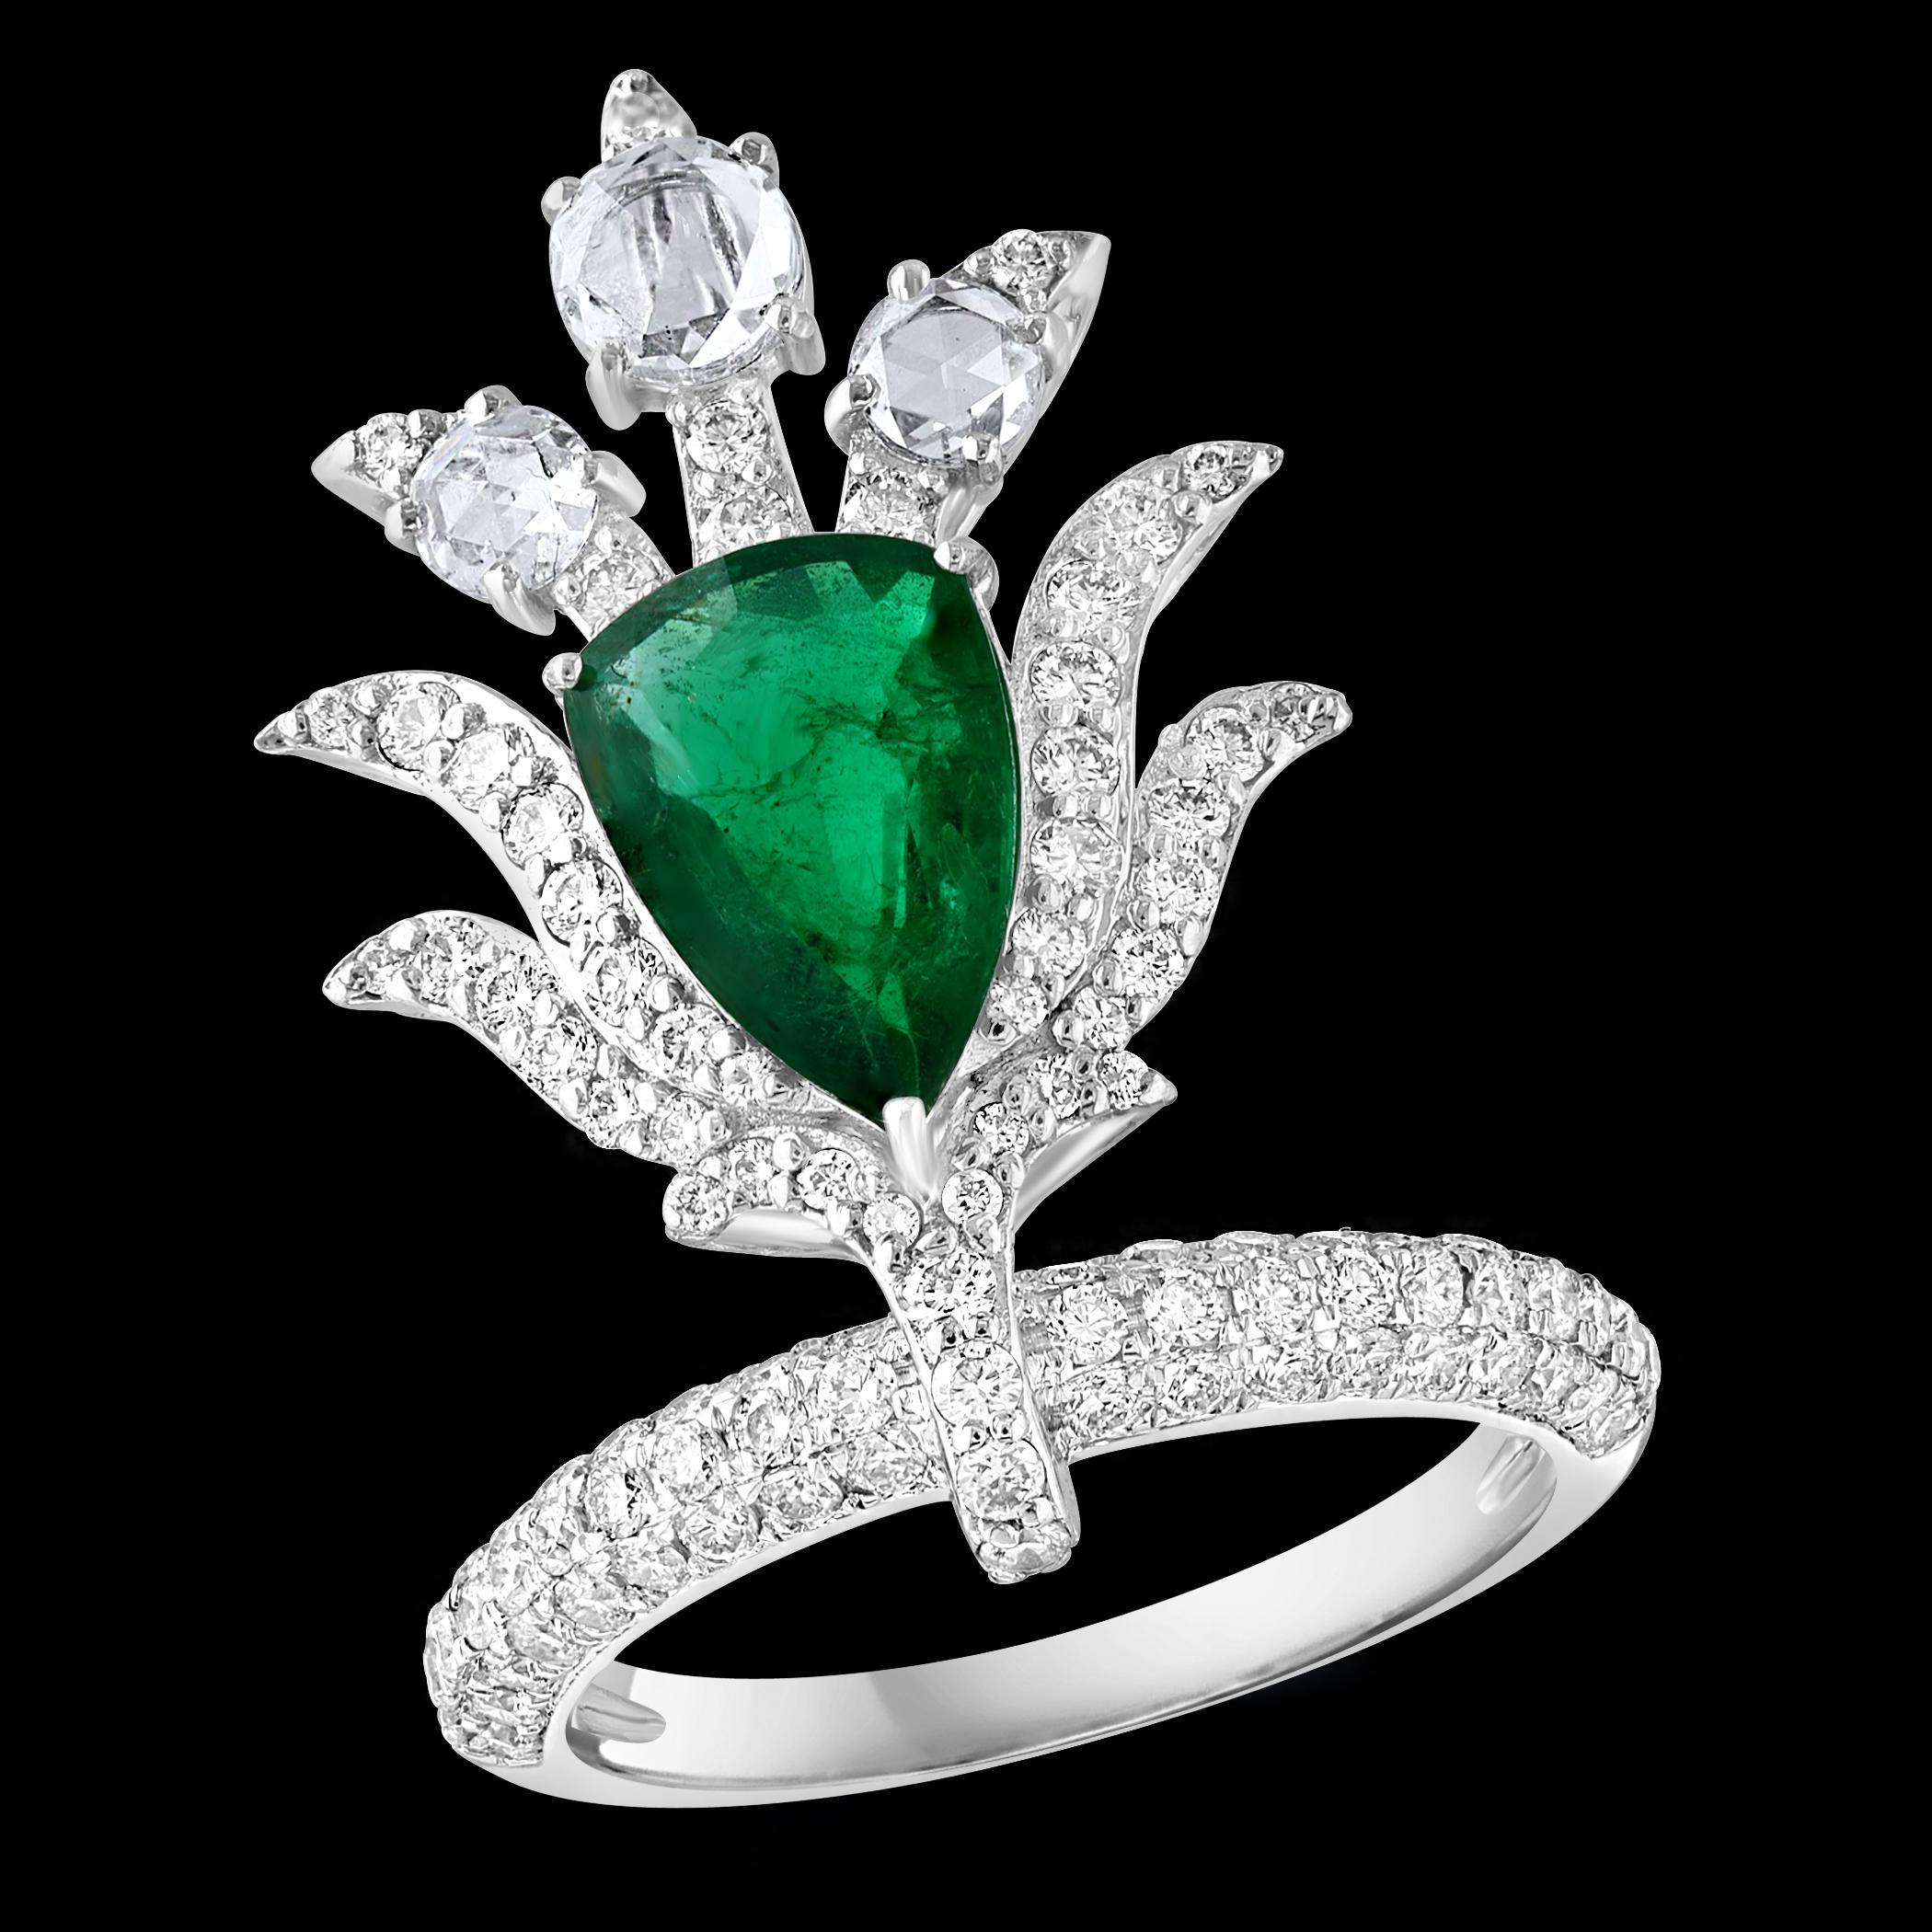 2 Ct Finest Zambian Pear Emerald & 2 Ct Diamond Ring in 18 Kt Gold Size 7. This classic ring features a pear-shaped Zambian emerald of extreme fine quality, boasting a desirable color and luster, originating from Colombia. Accompanied by 3